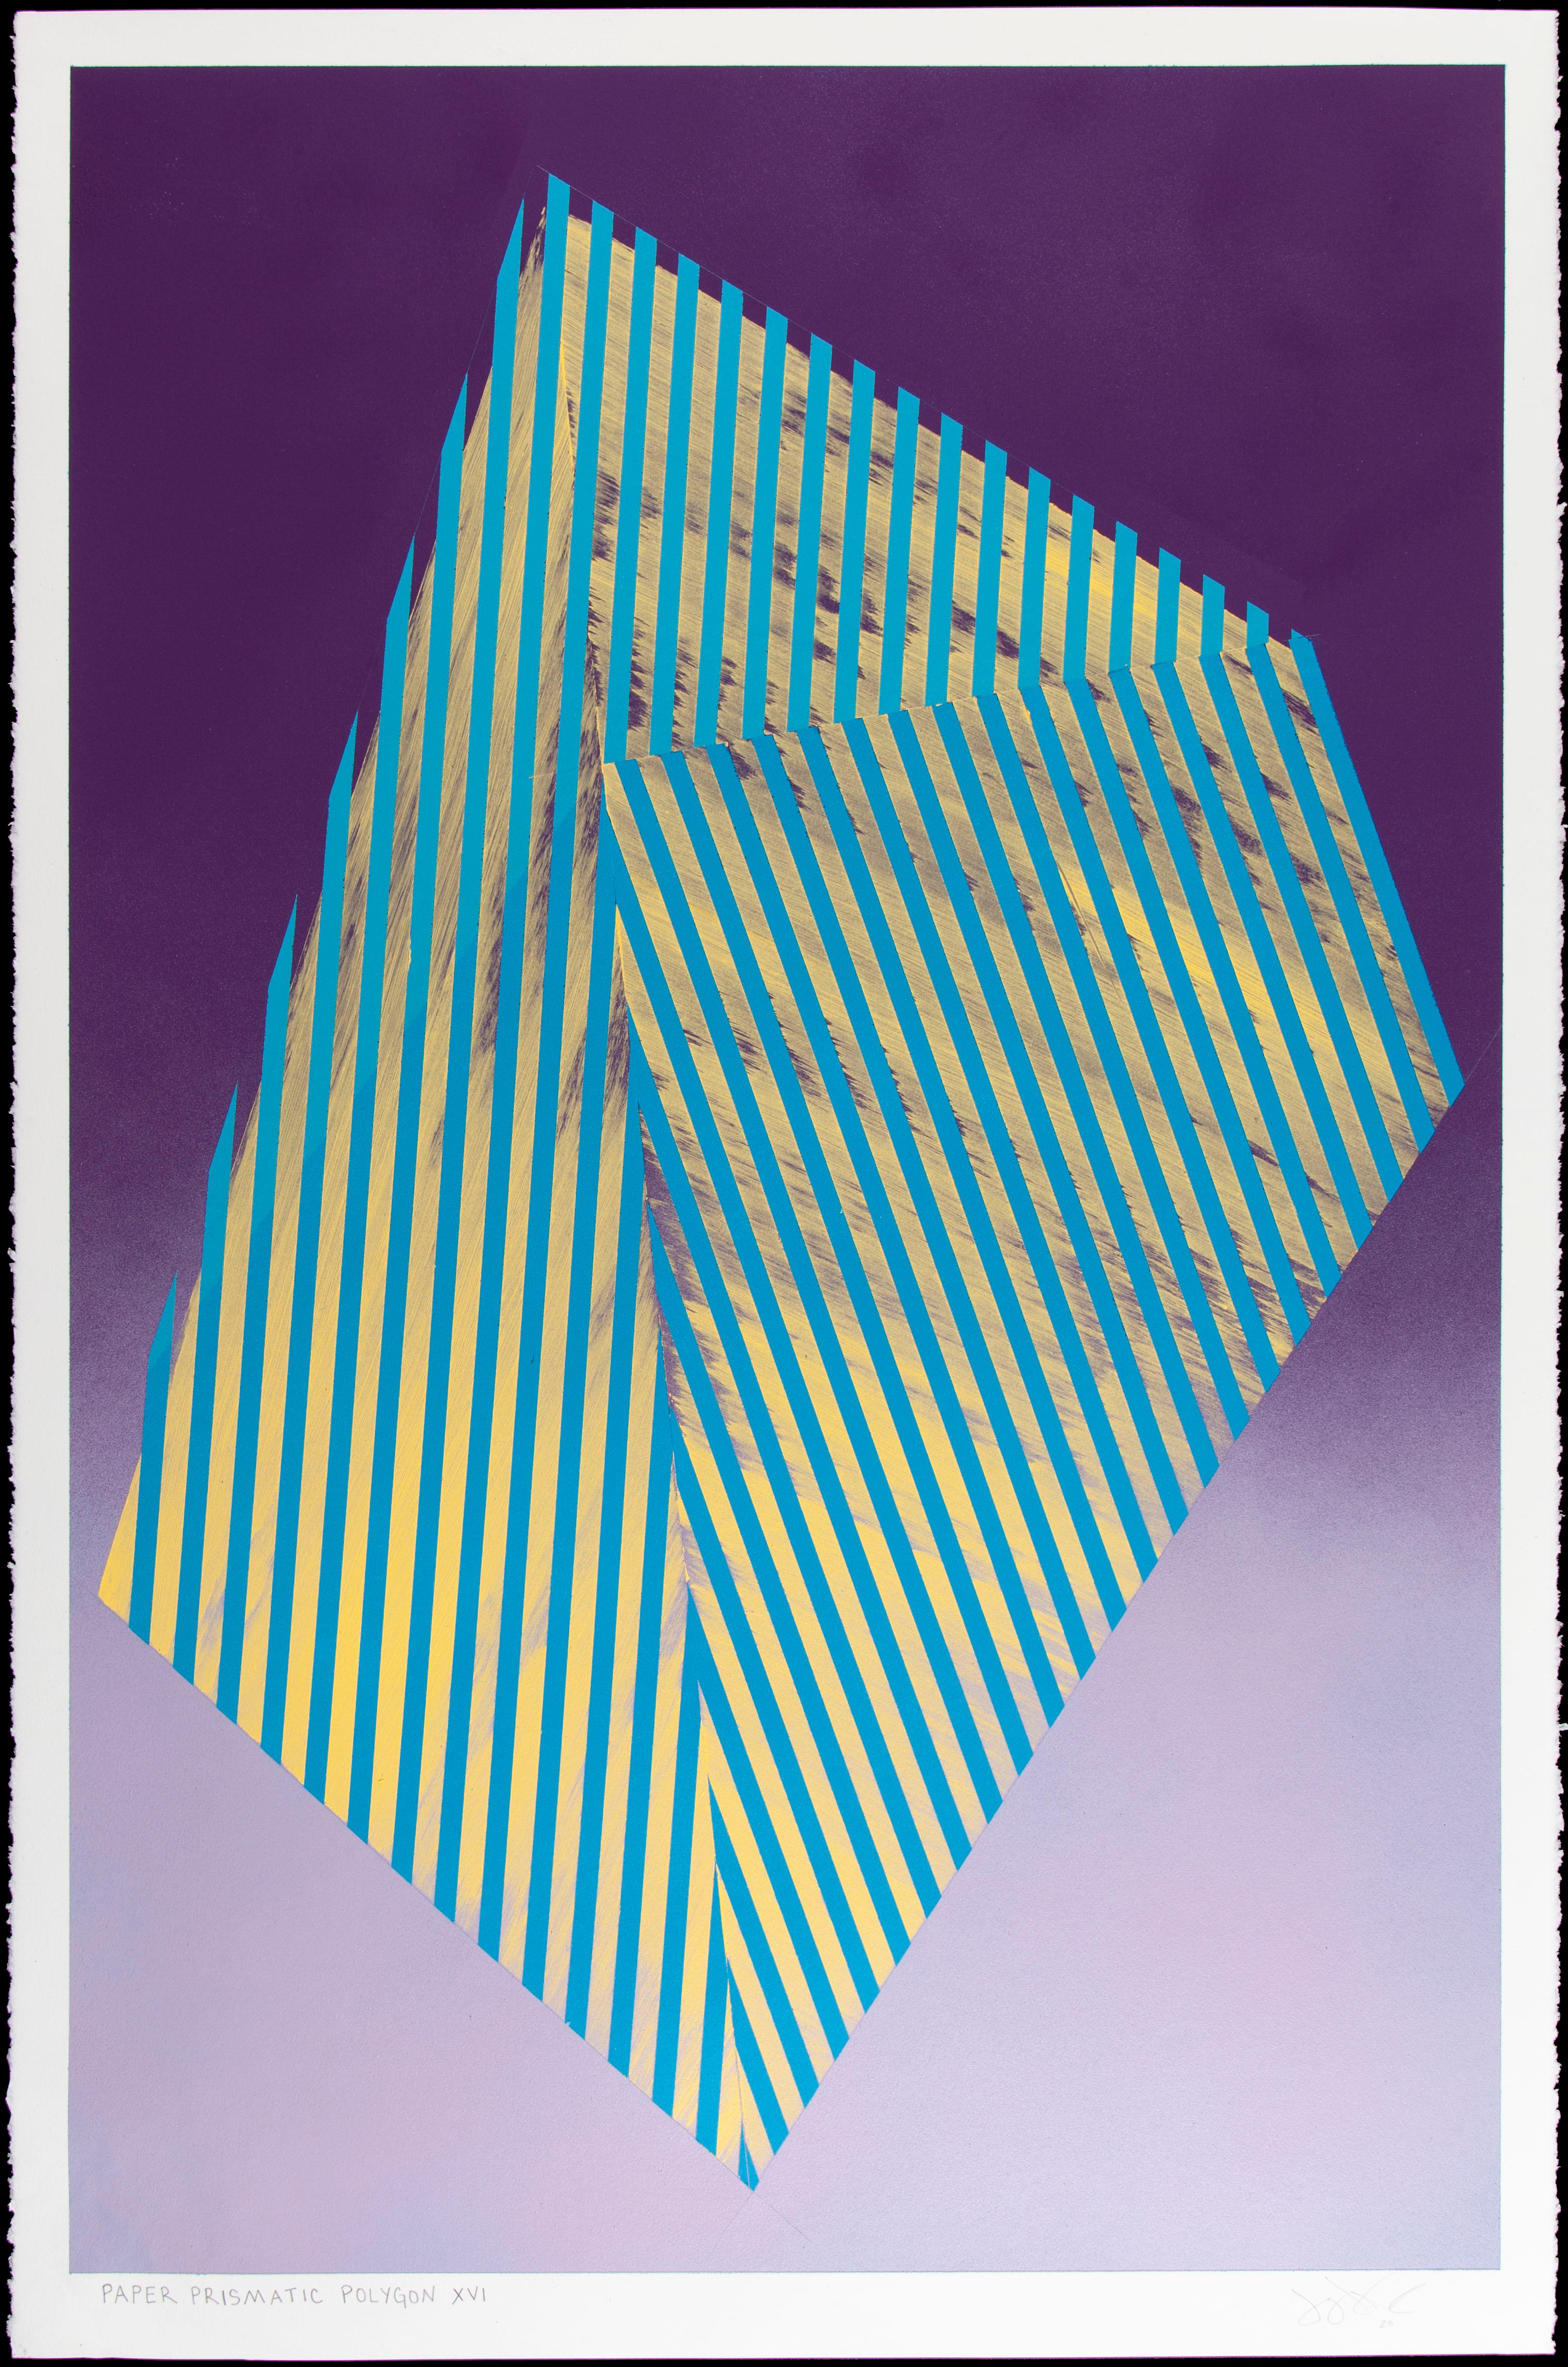 Prismatic Polygon XVI: geometric abstract painting in blue, yellow, purple ombre For Sale 2